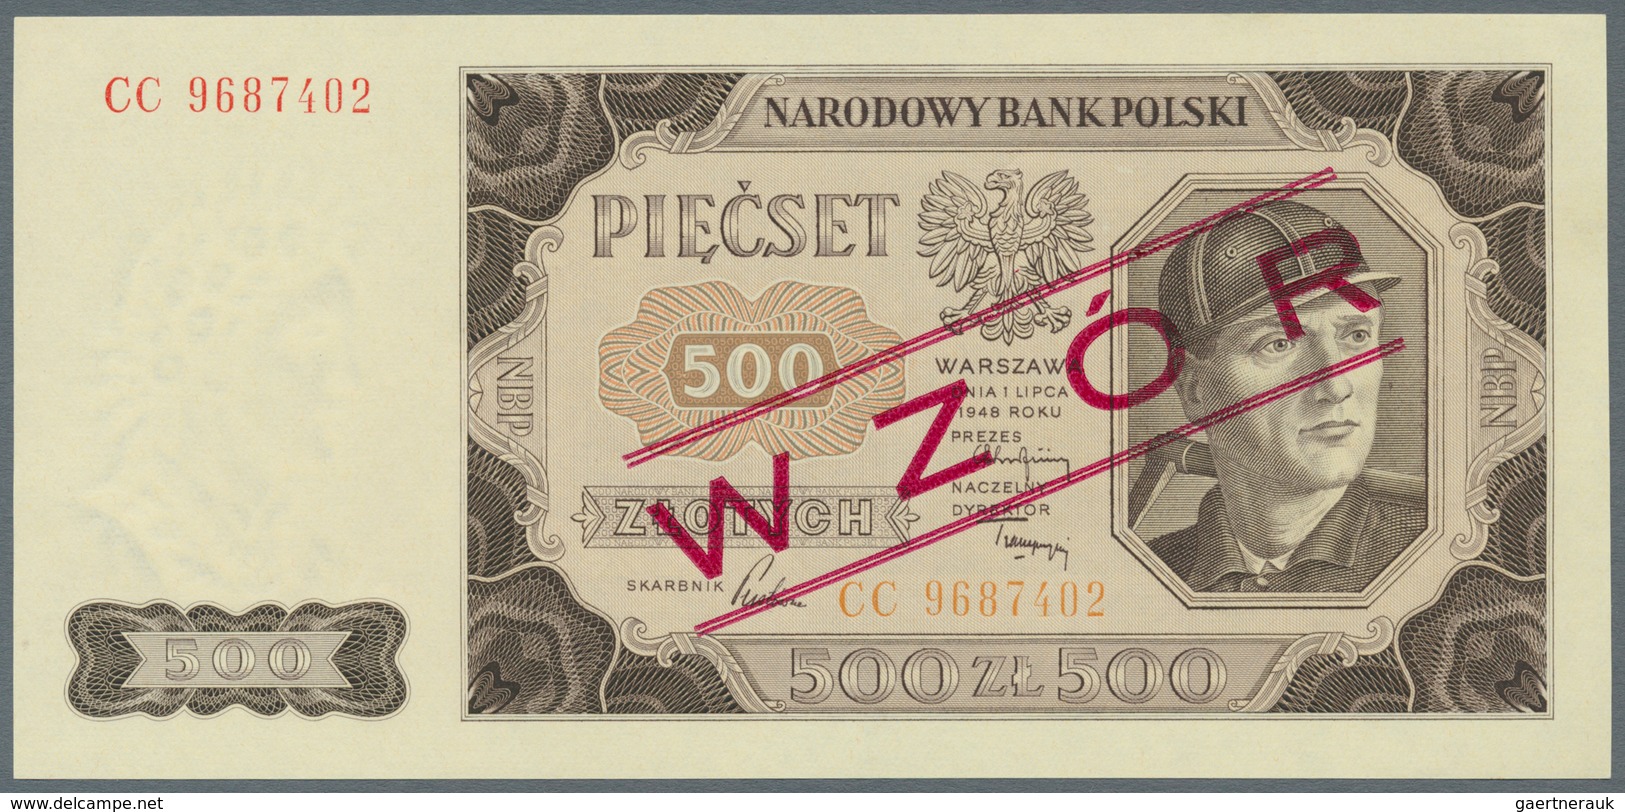 Europa: large collection of about 600 banknotes from Europa in collectors album, mostly in UNC condi